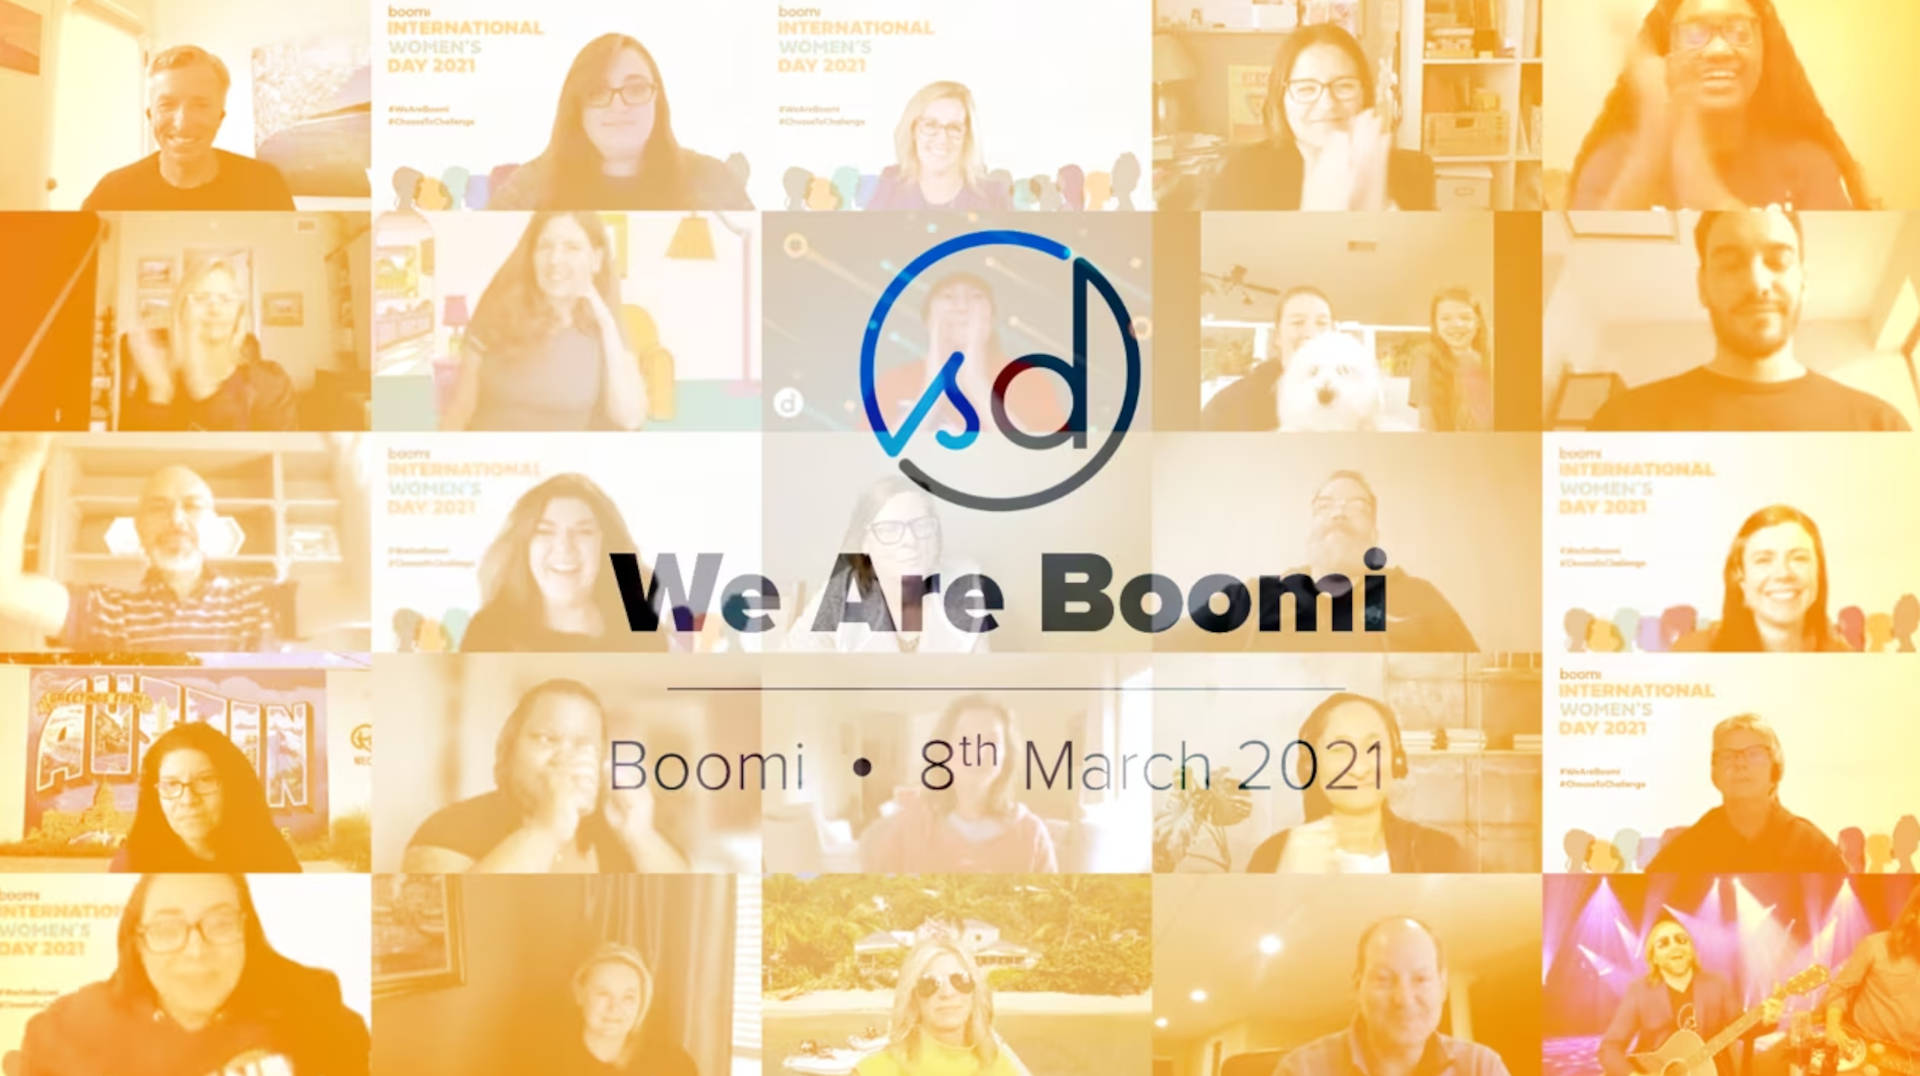 Boomi: We Are Boomi with SongDivision